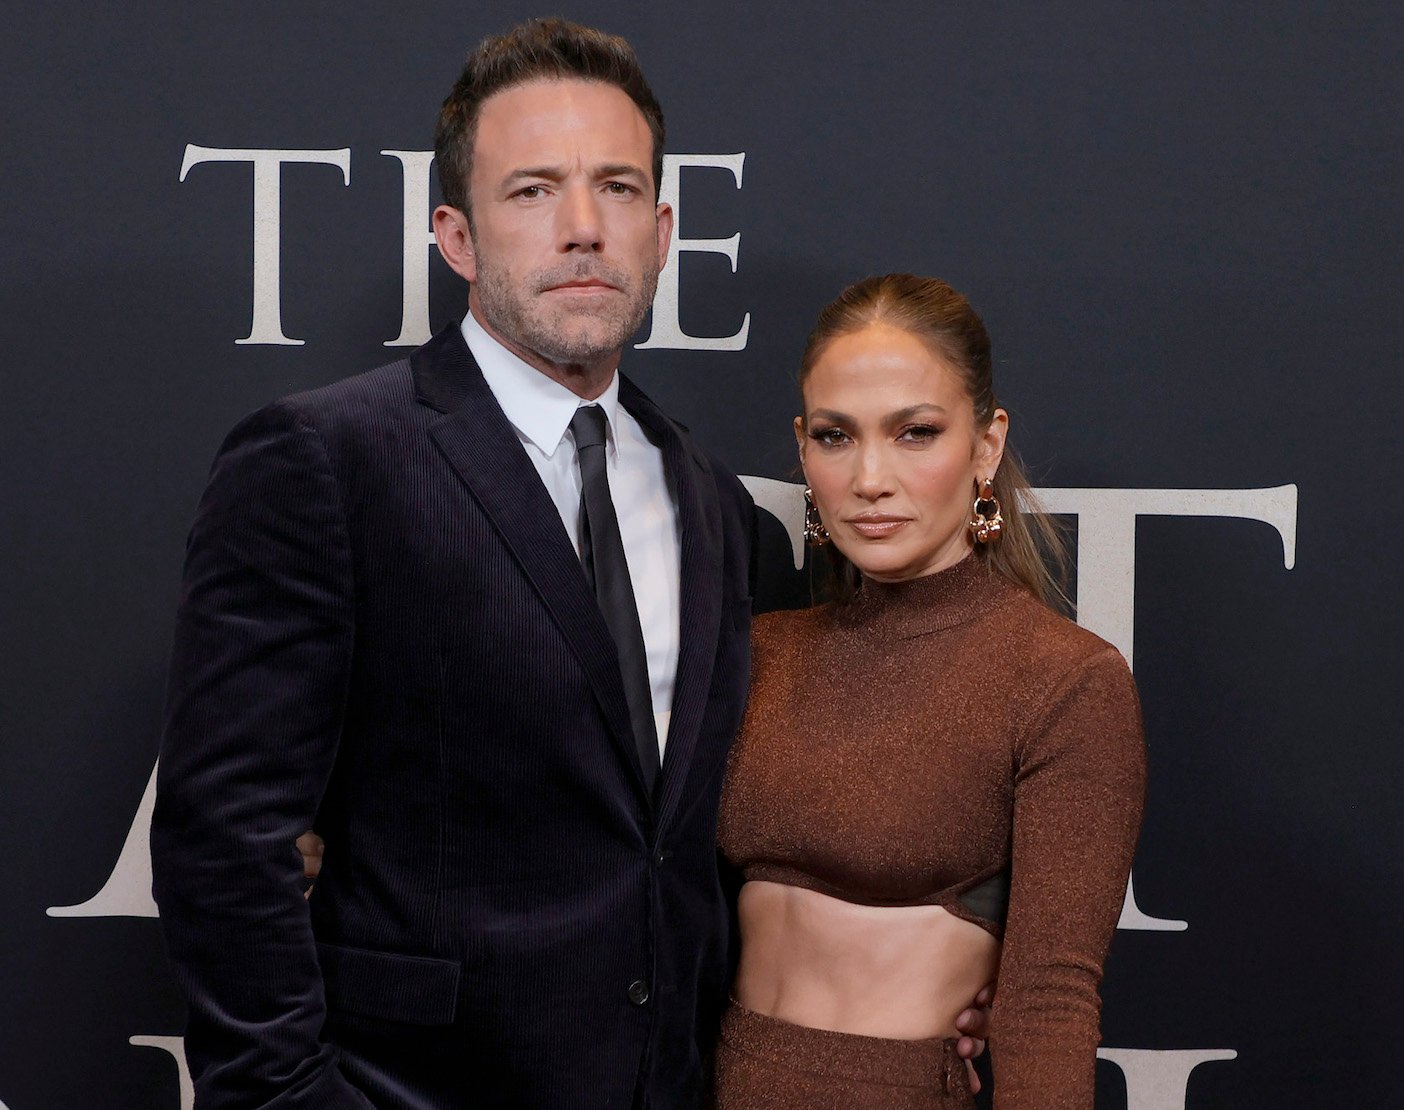 Sketchy Source Says Ben Affleck Supposedly ‘Restless’ In Relationship With Jennifer Lopez